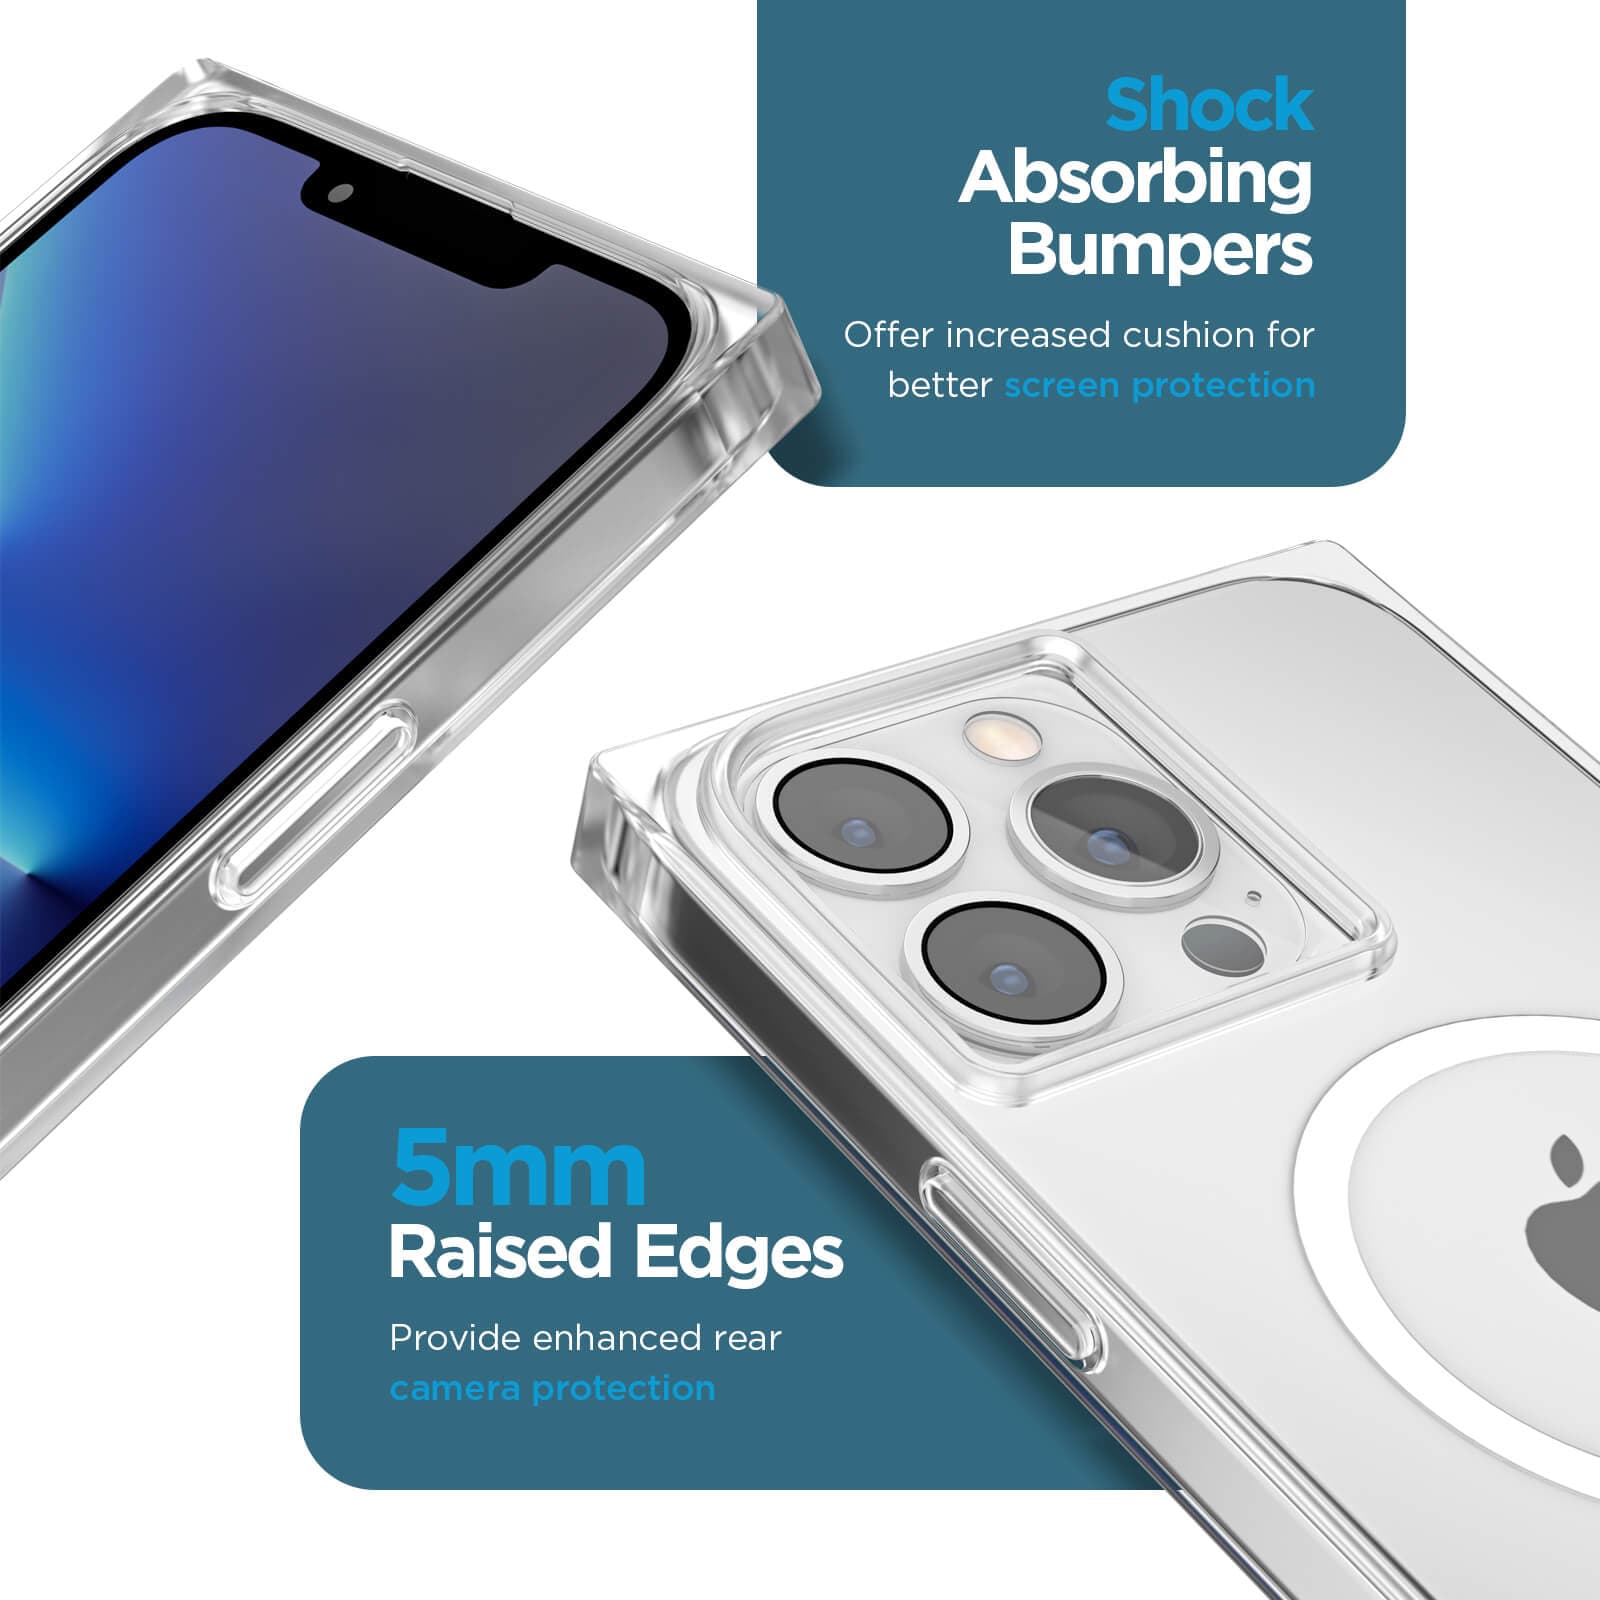 Shock absorbing bumpers. Offer increased cushion for better screen protection. 5mm raised edges provide enhanced rear camera protection. color::Clear